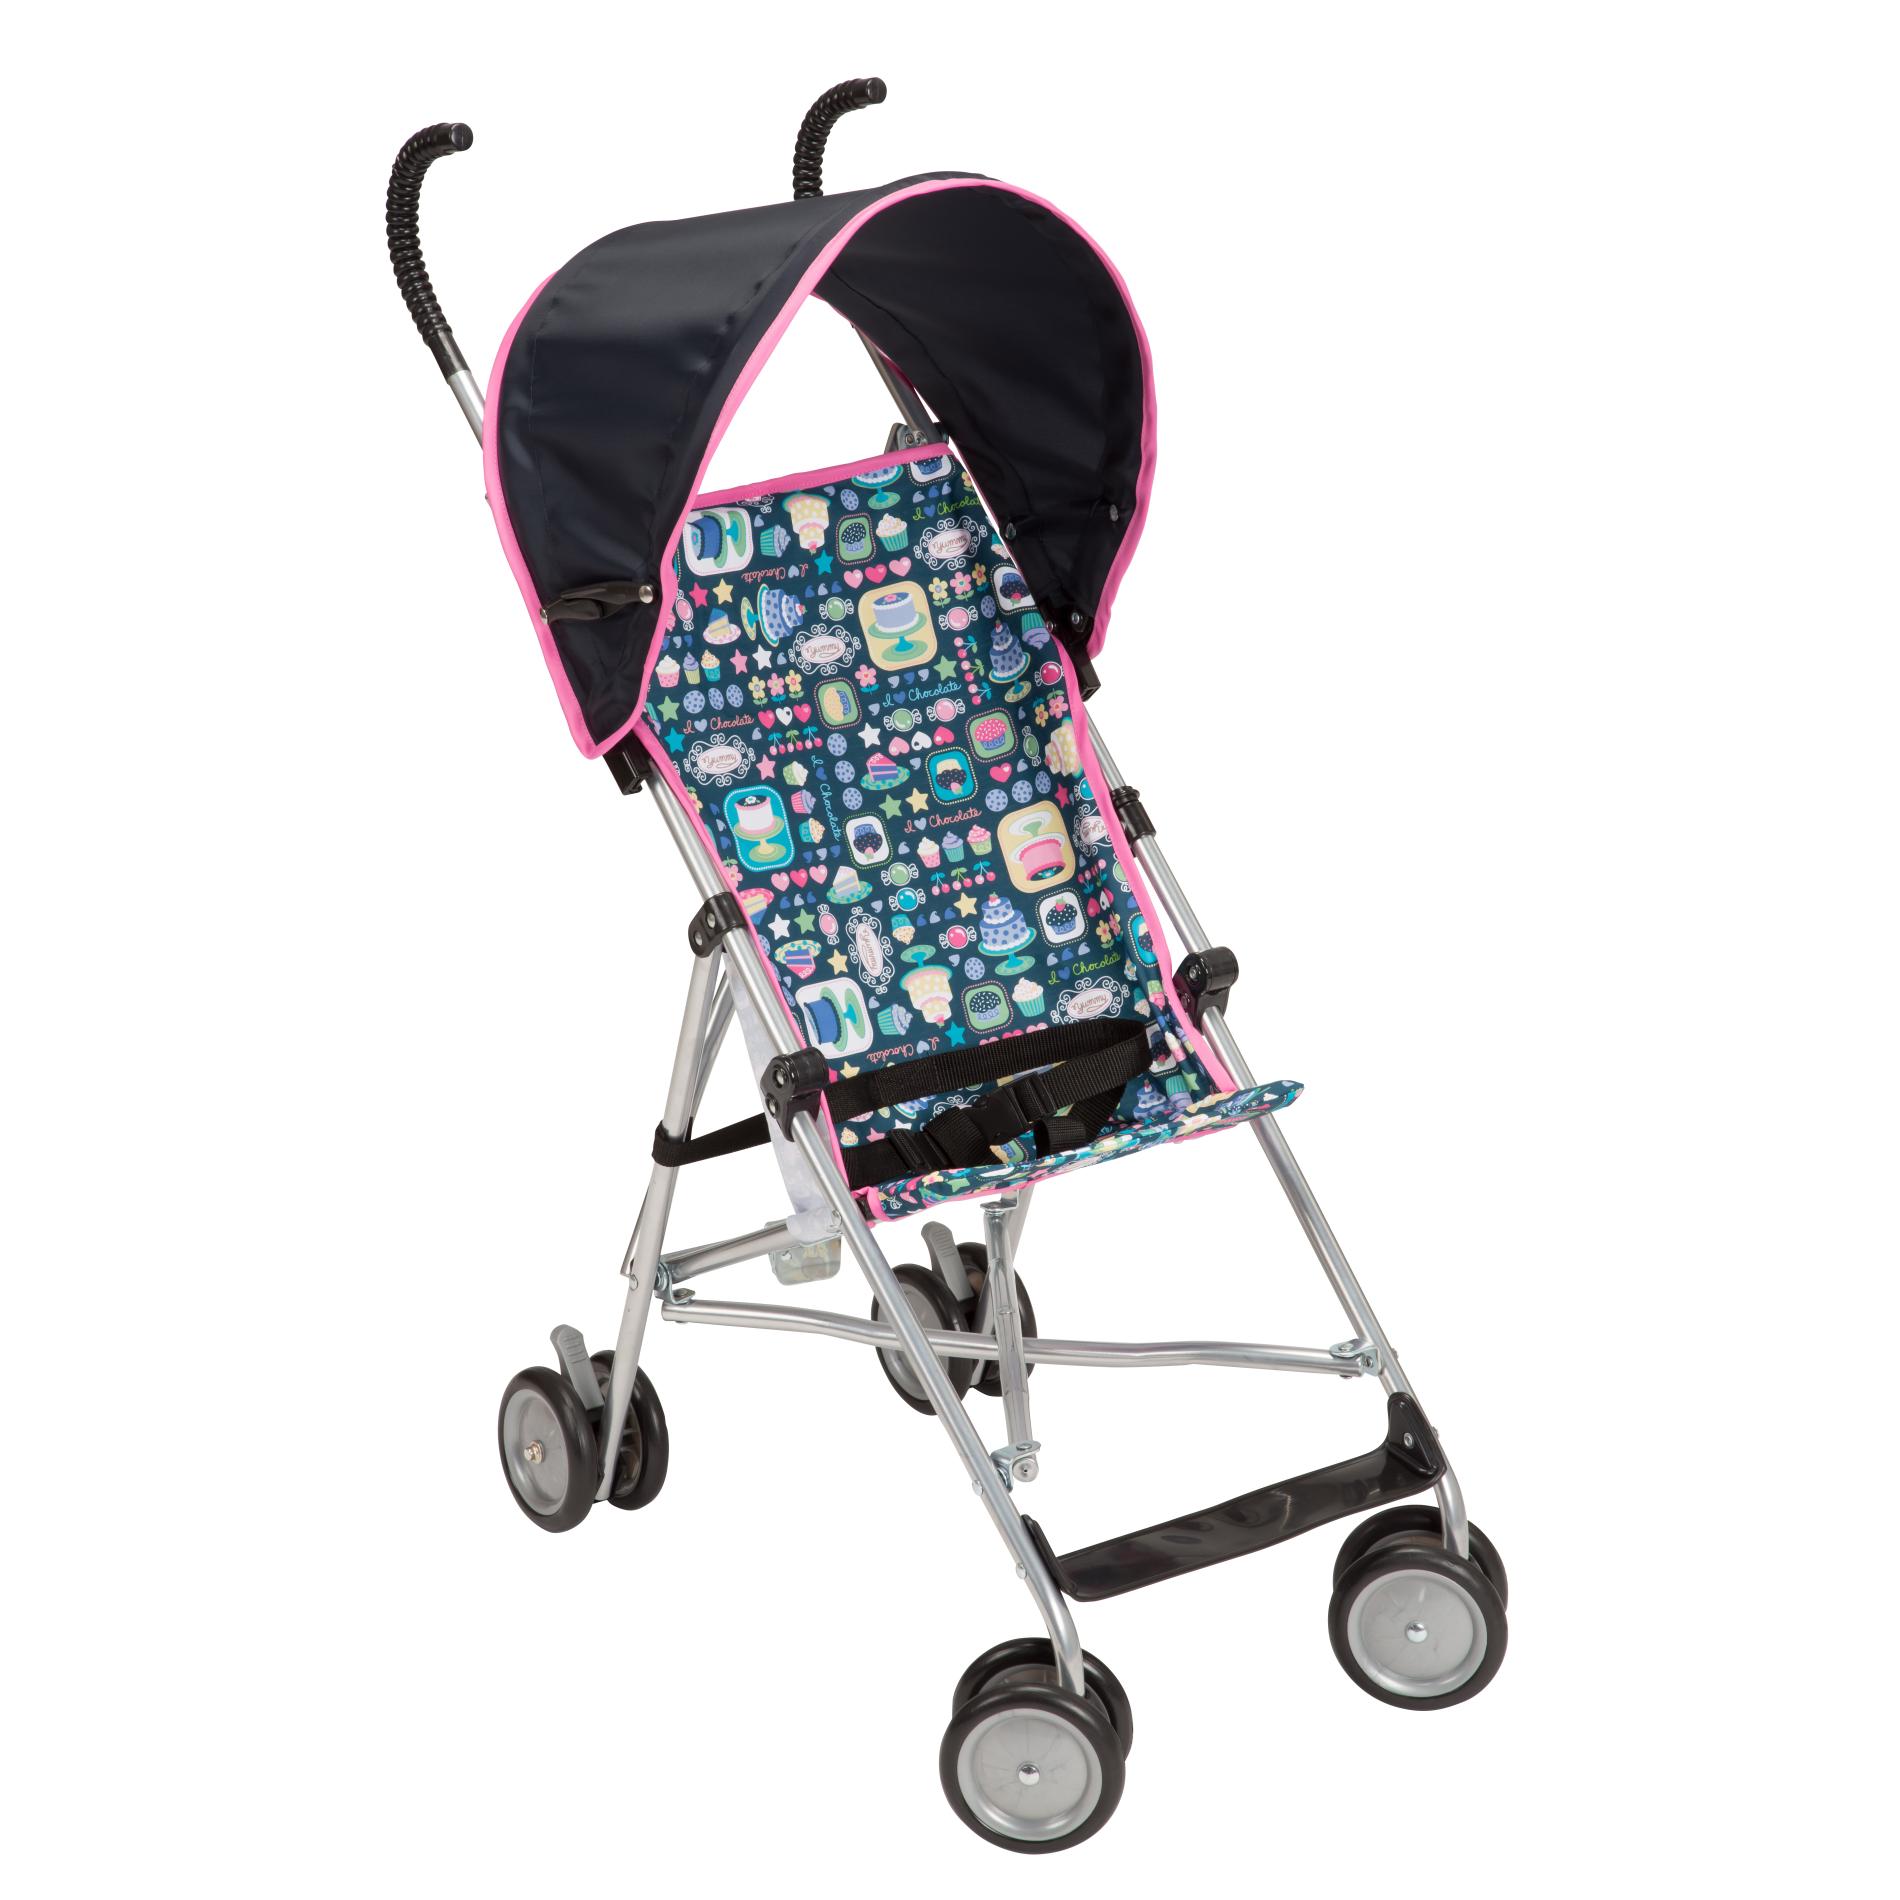 sears baby car seats and stroller